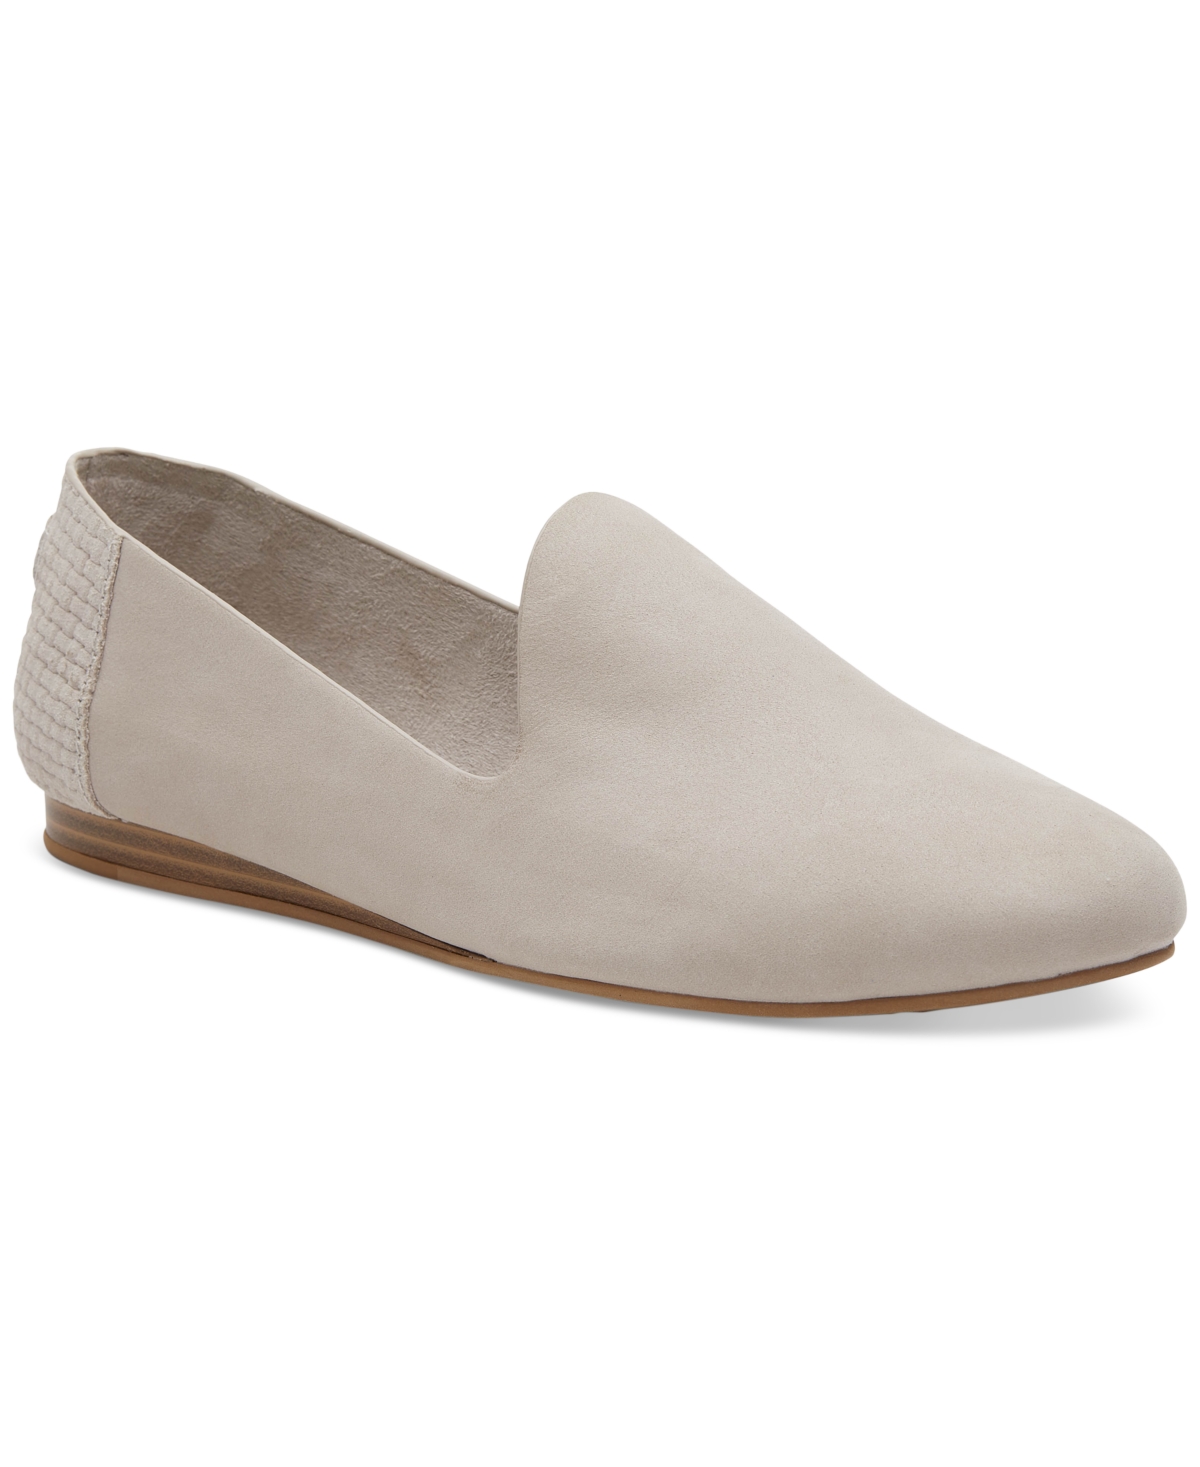 TOMS WOMEN'S DARCY SLIP-ON LOAFER FLATS WOMEN'S SHOES